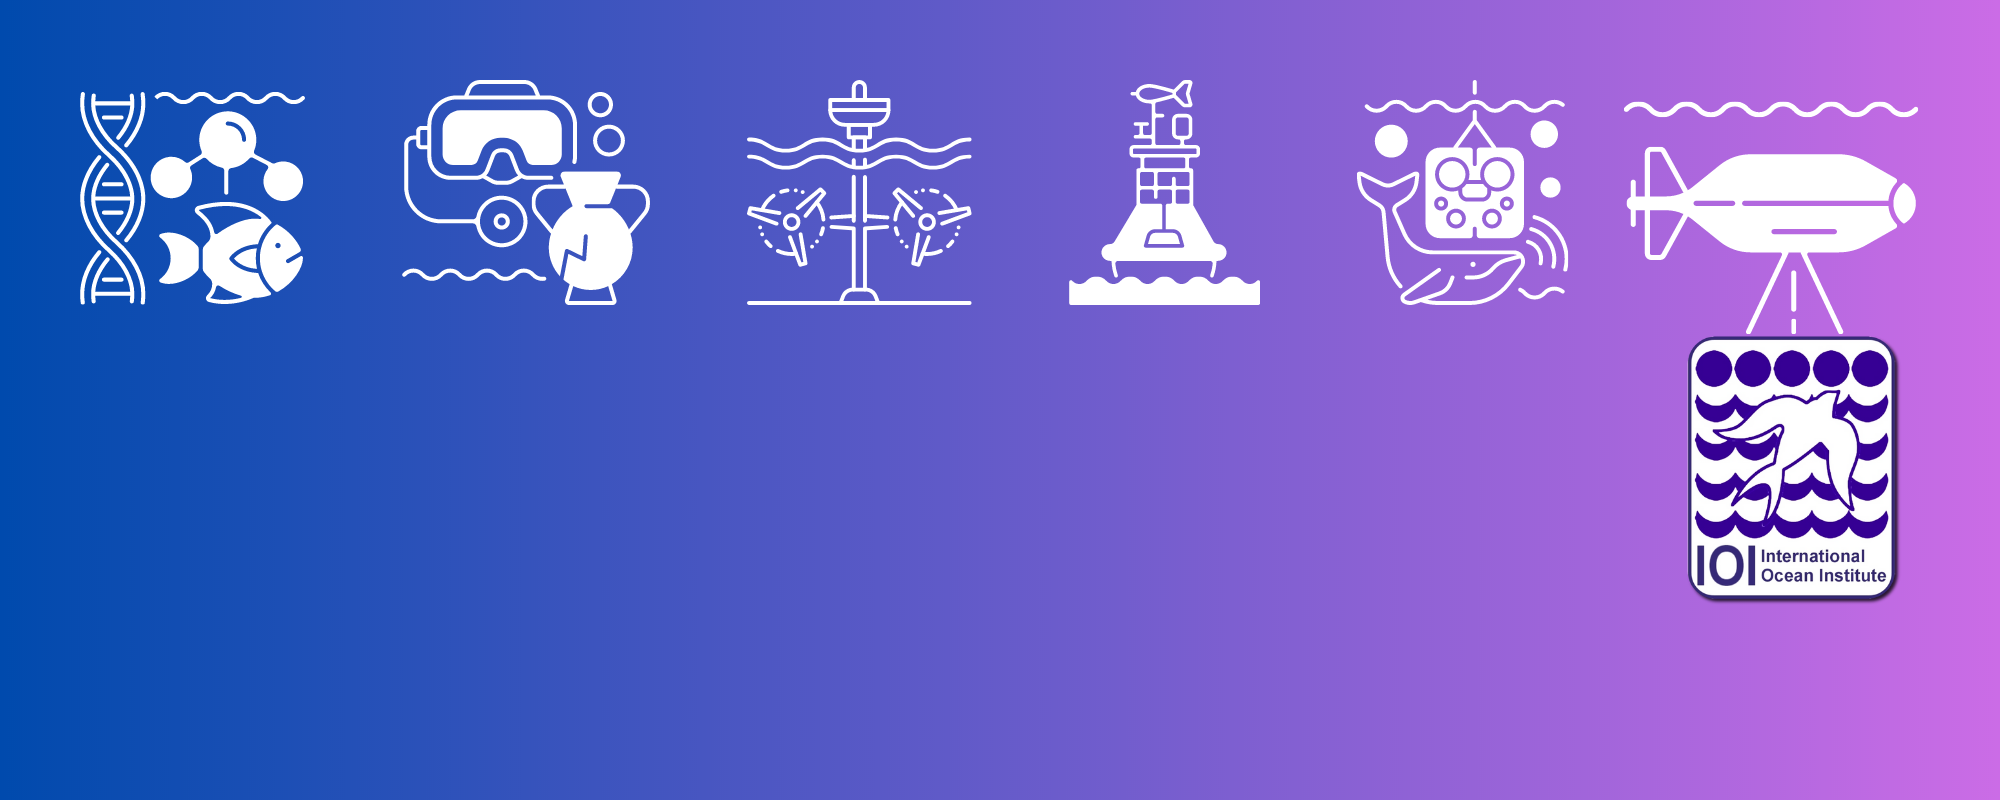 Icons depicting the sea, a fish, goggles, a boat, a submarine the IOI logo on a blue and purple background